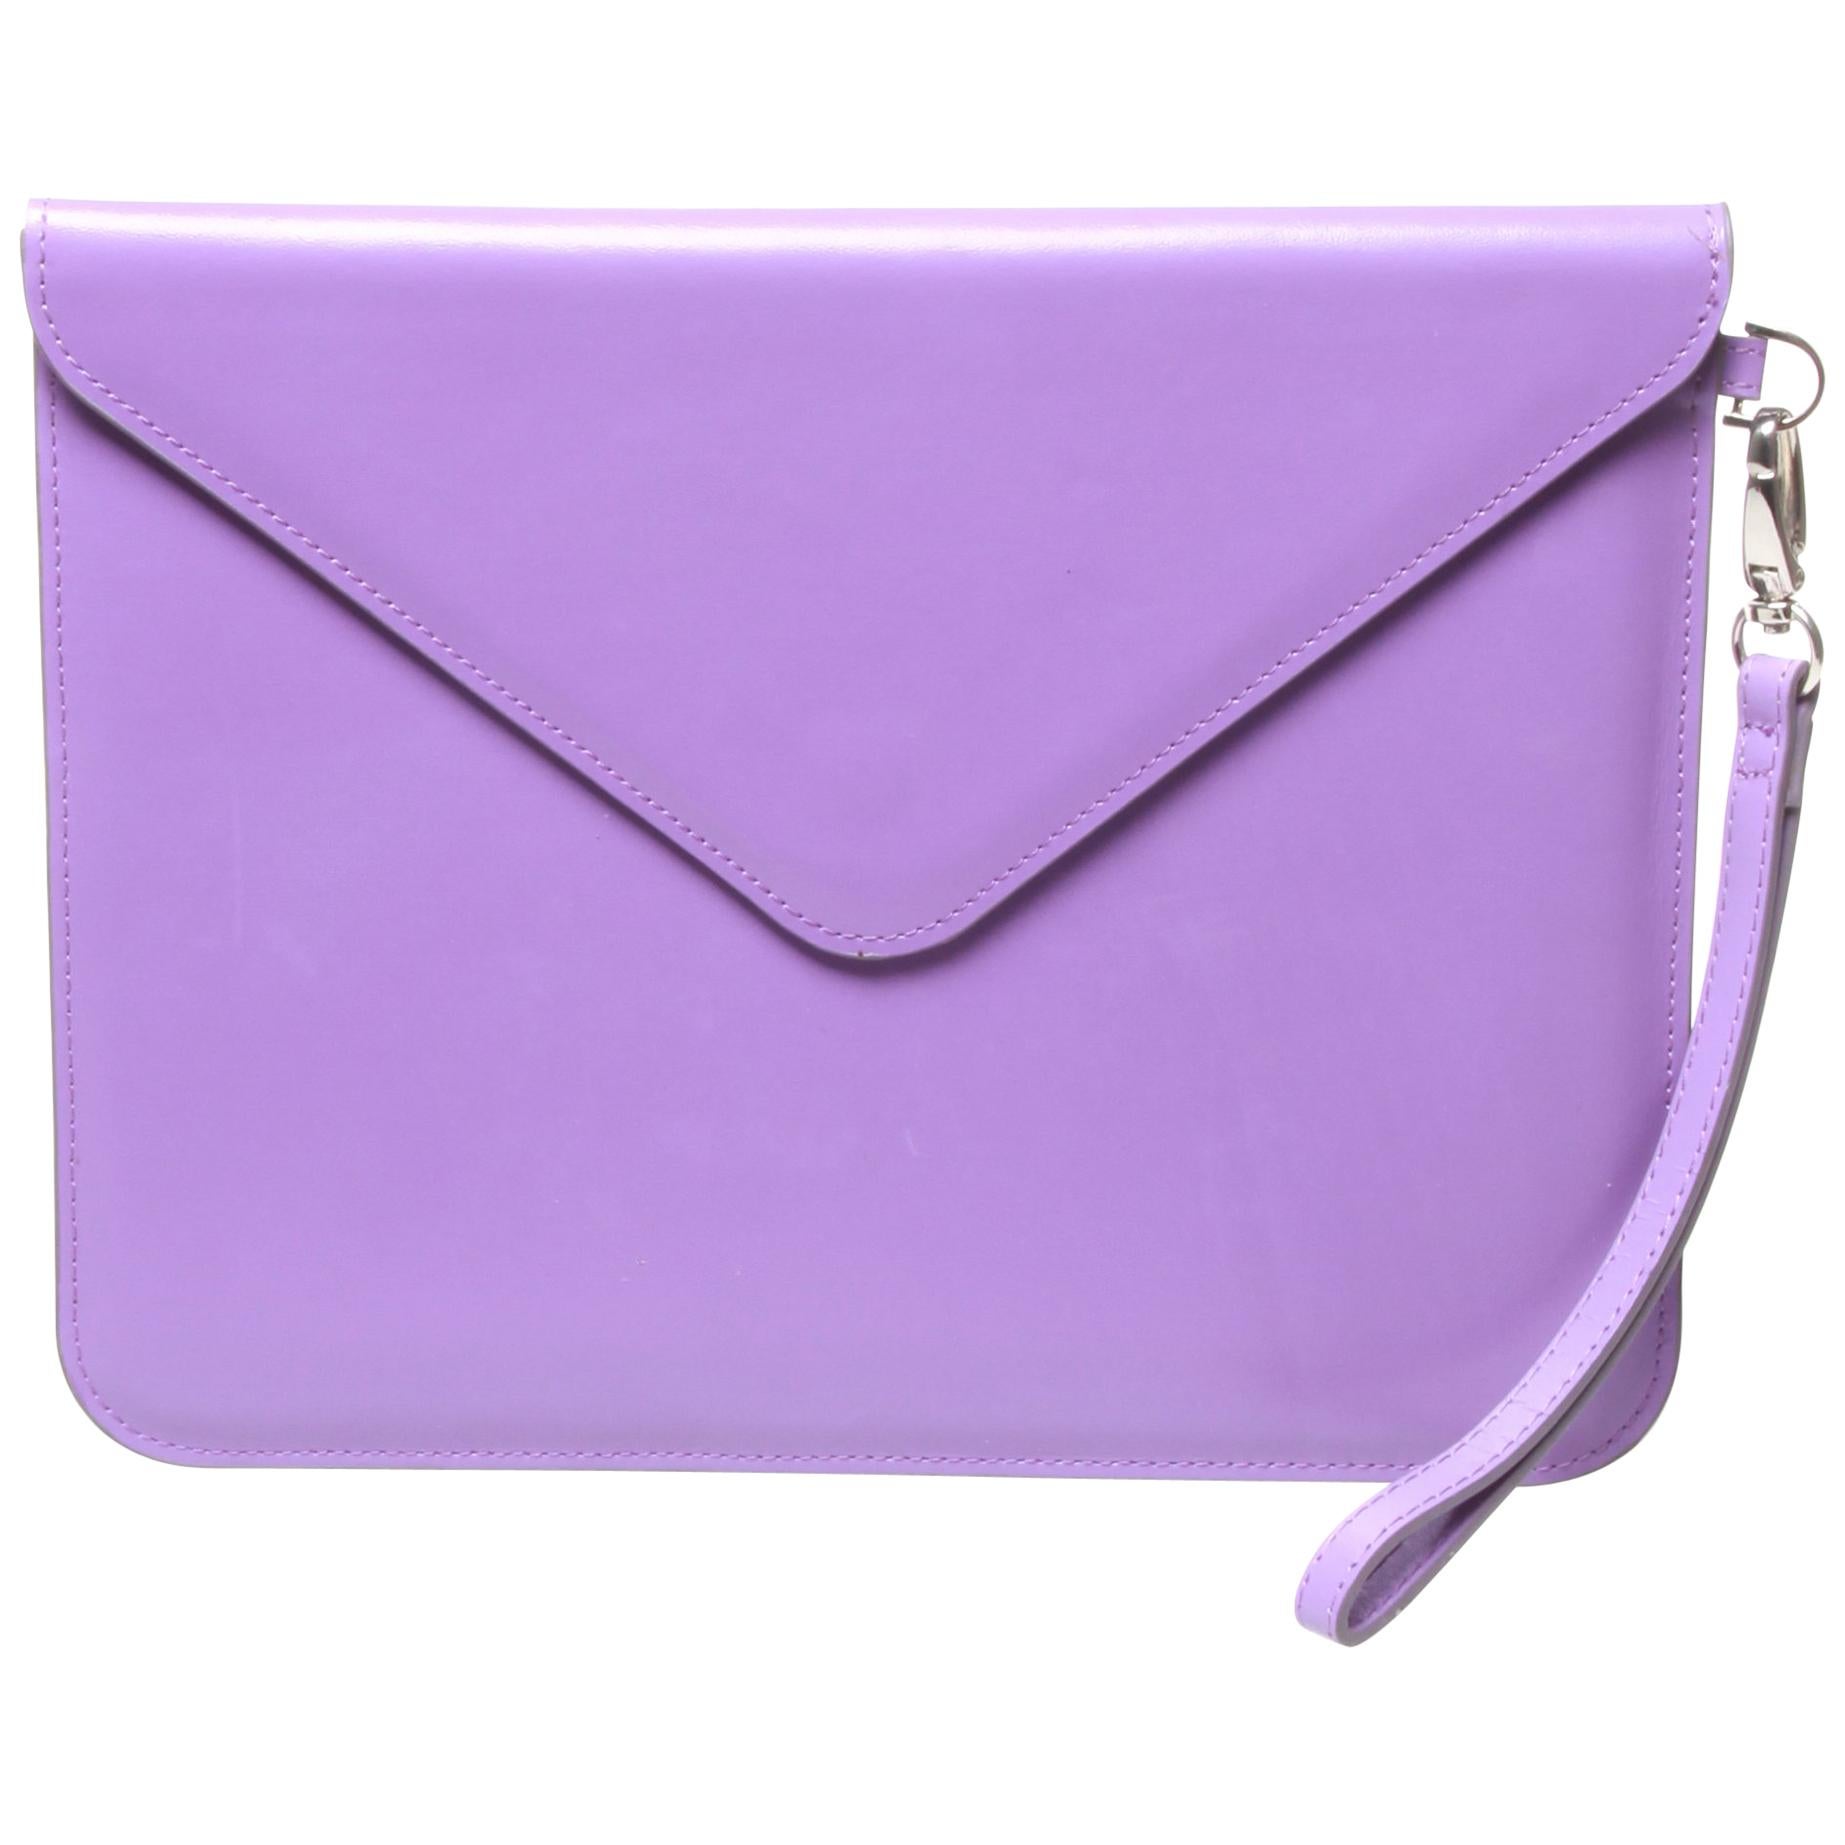 Paper Thinks purple envelope clutch For Sale